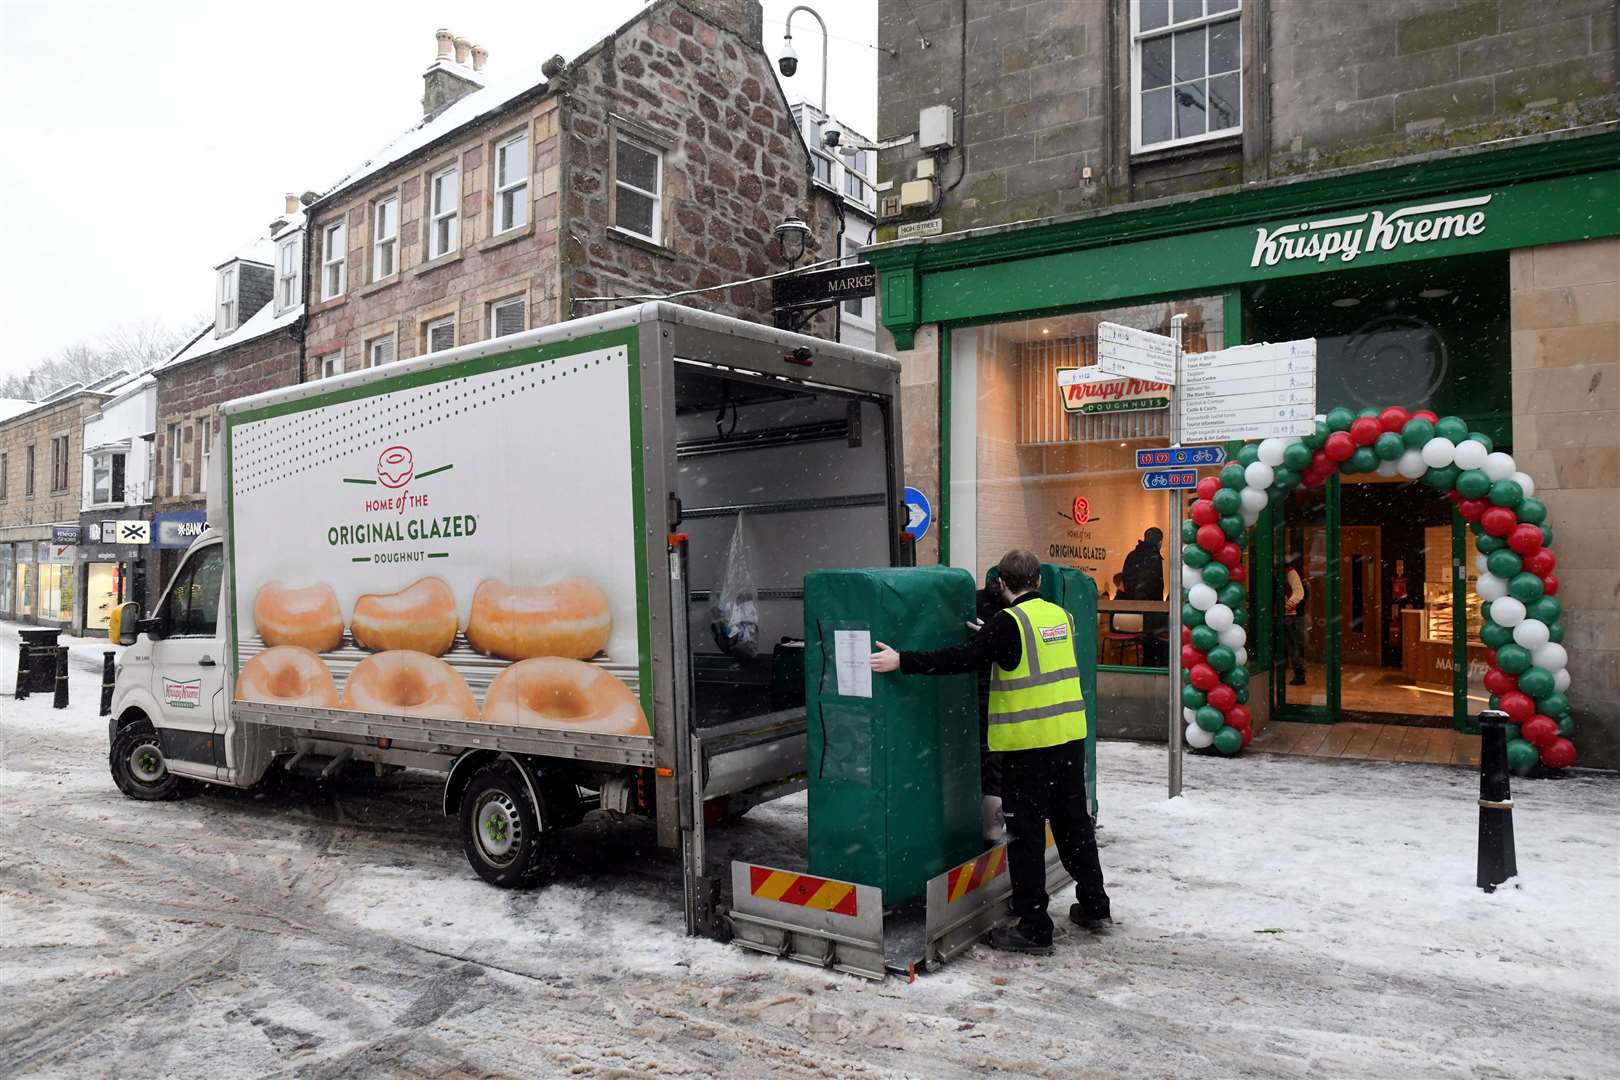 Doughnuts arriving to the new shop in Inverness.